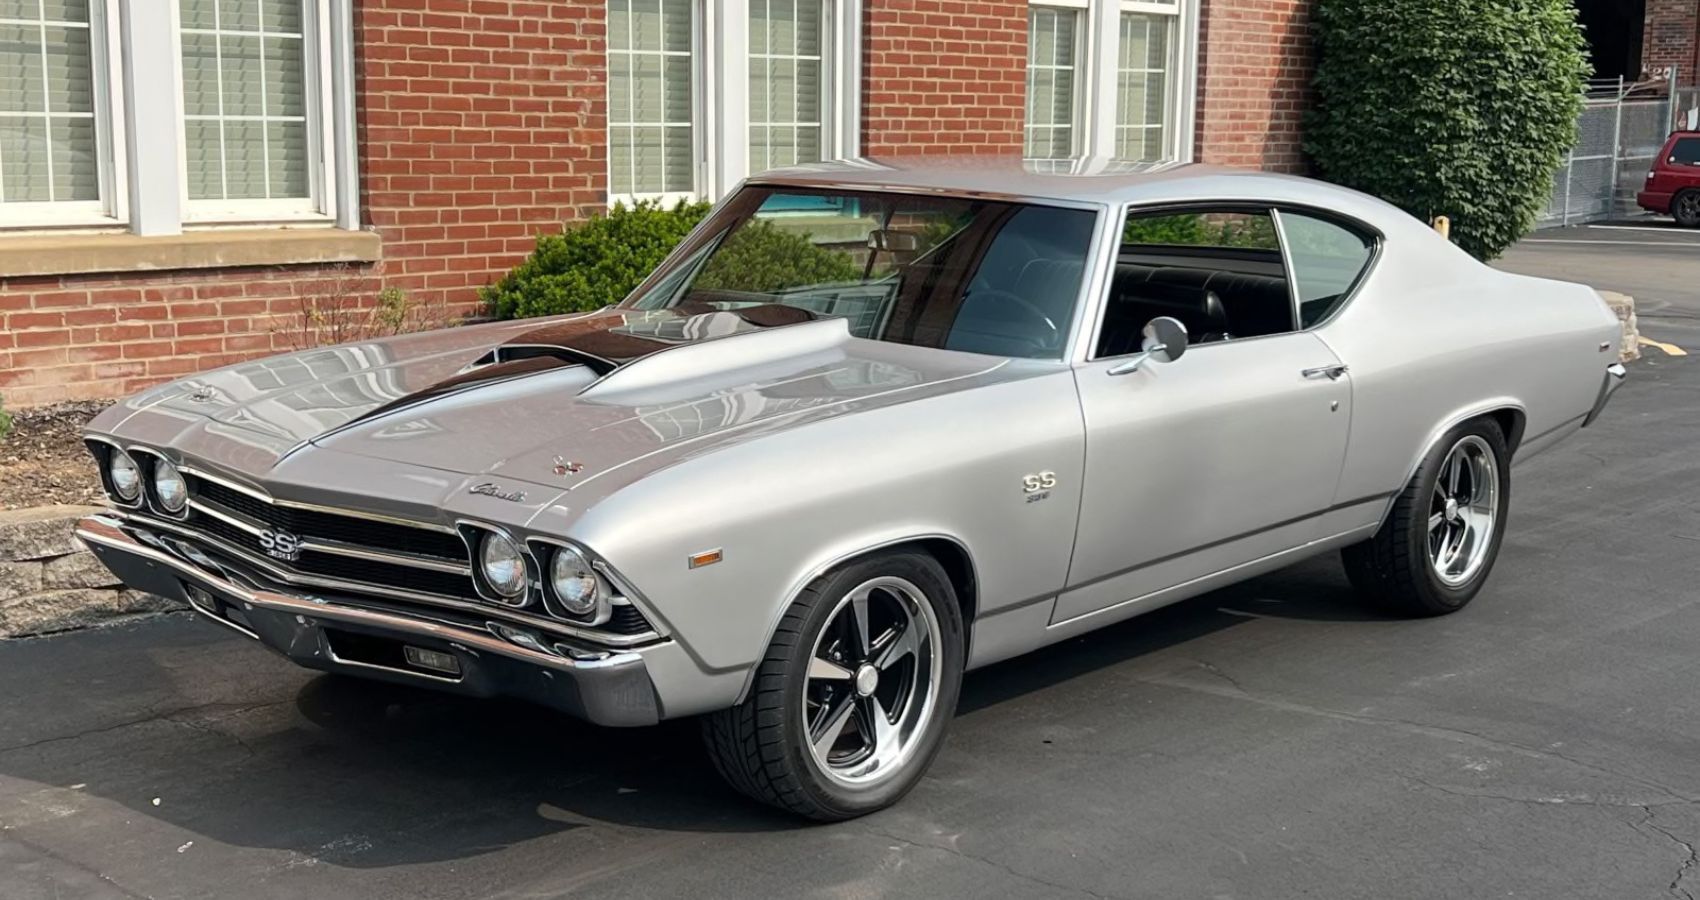 1969 Chevrolet Chevelle classic muscle car parked